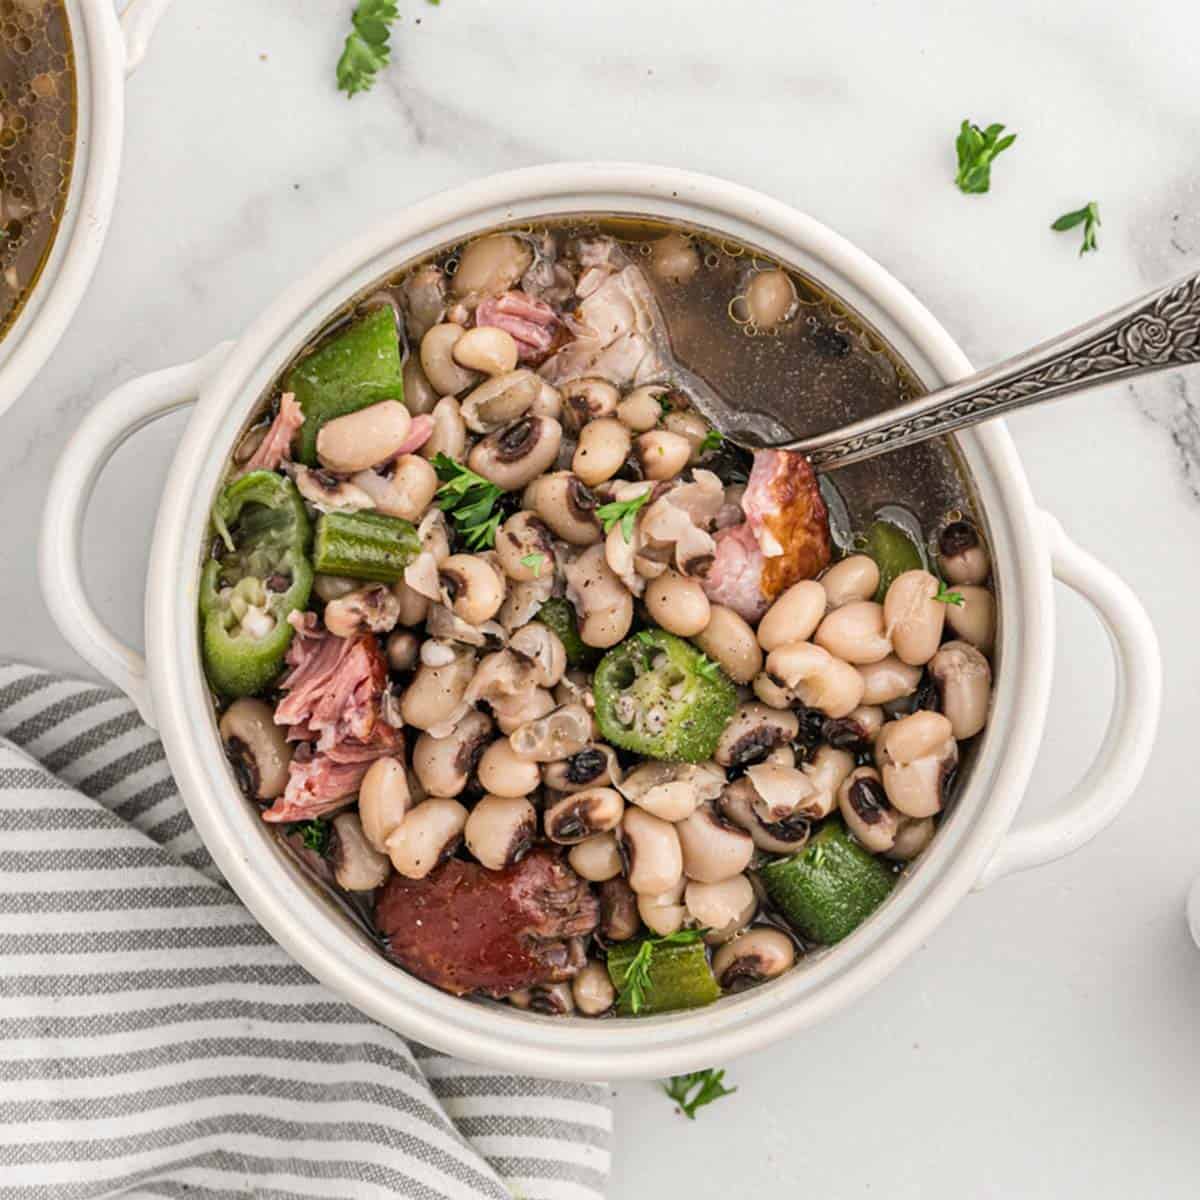 Black Eyed Peas with ham hock in white bowl with cornbread surrounding it for New Year's Day